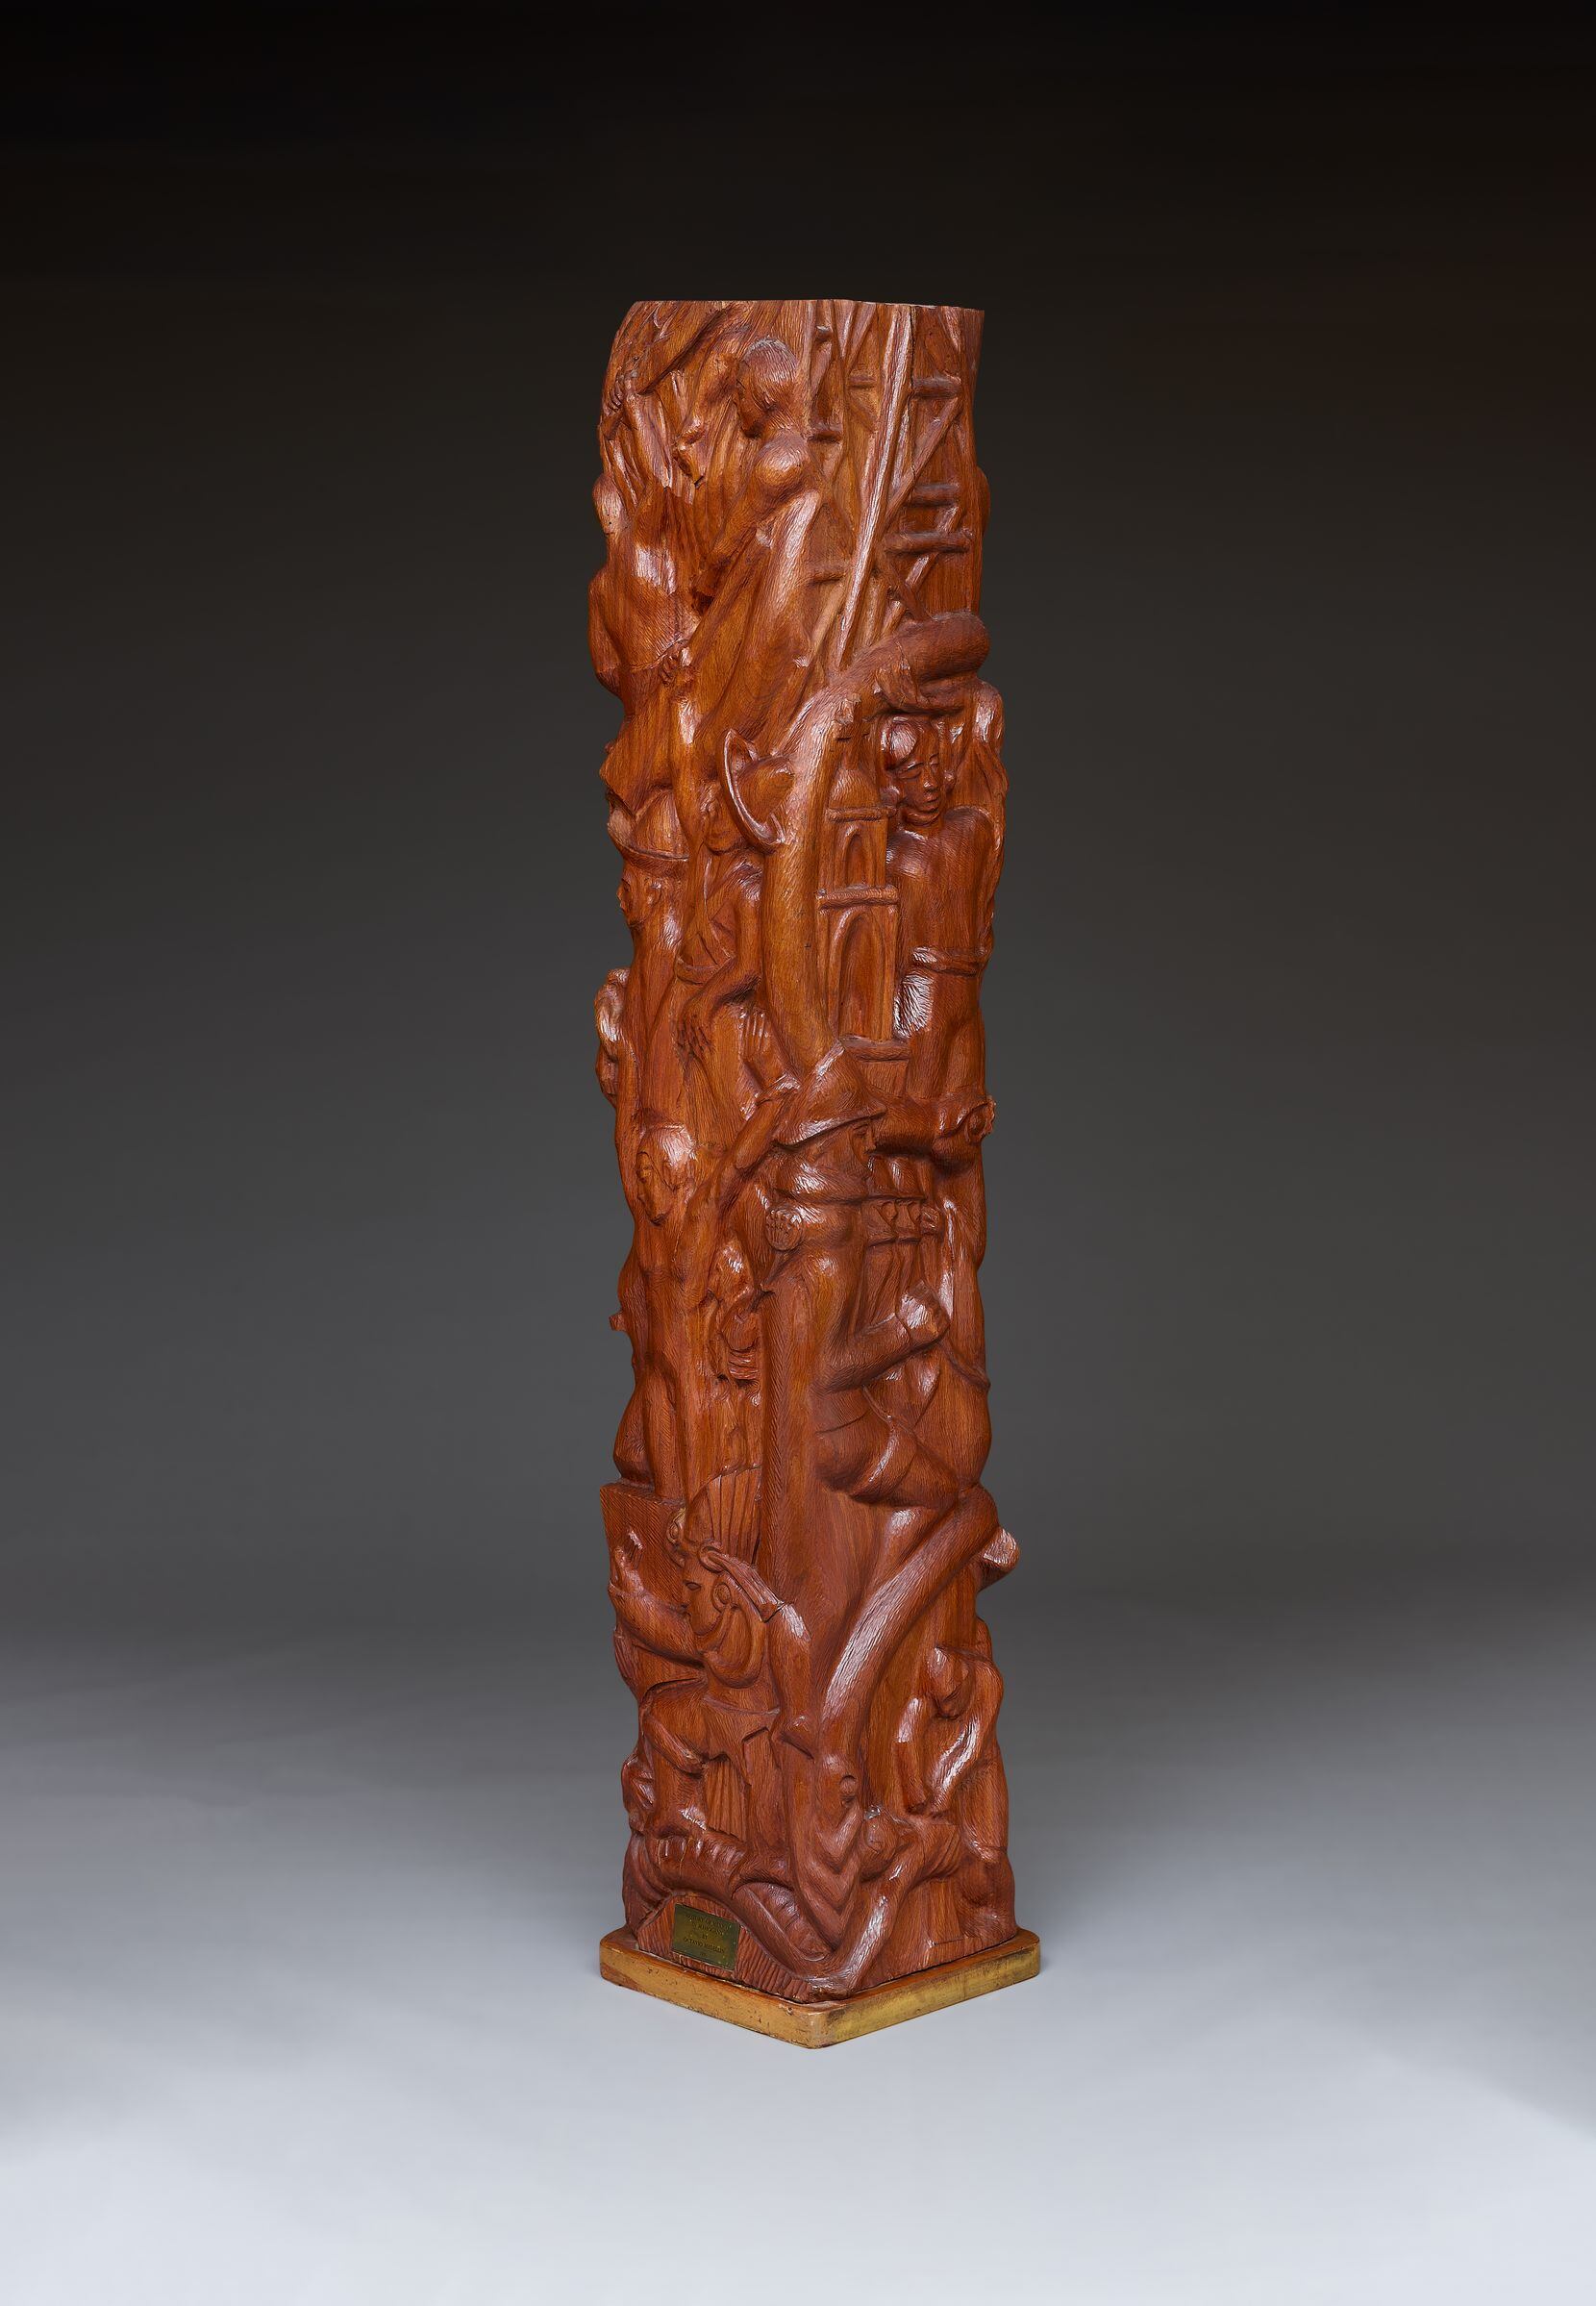 Octavio Medellín's "History of Mexico," a 1950 carving in red mahogany, covers many...